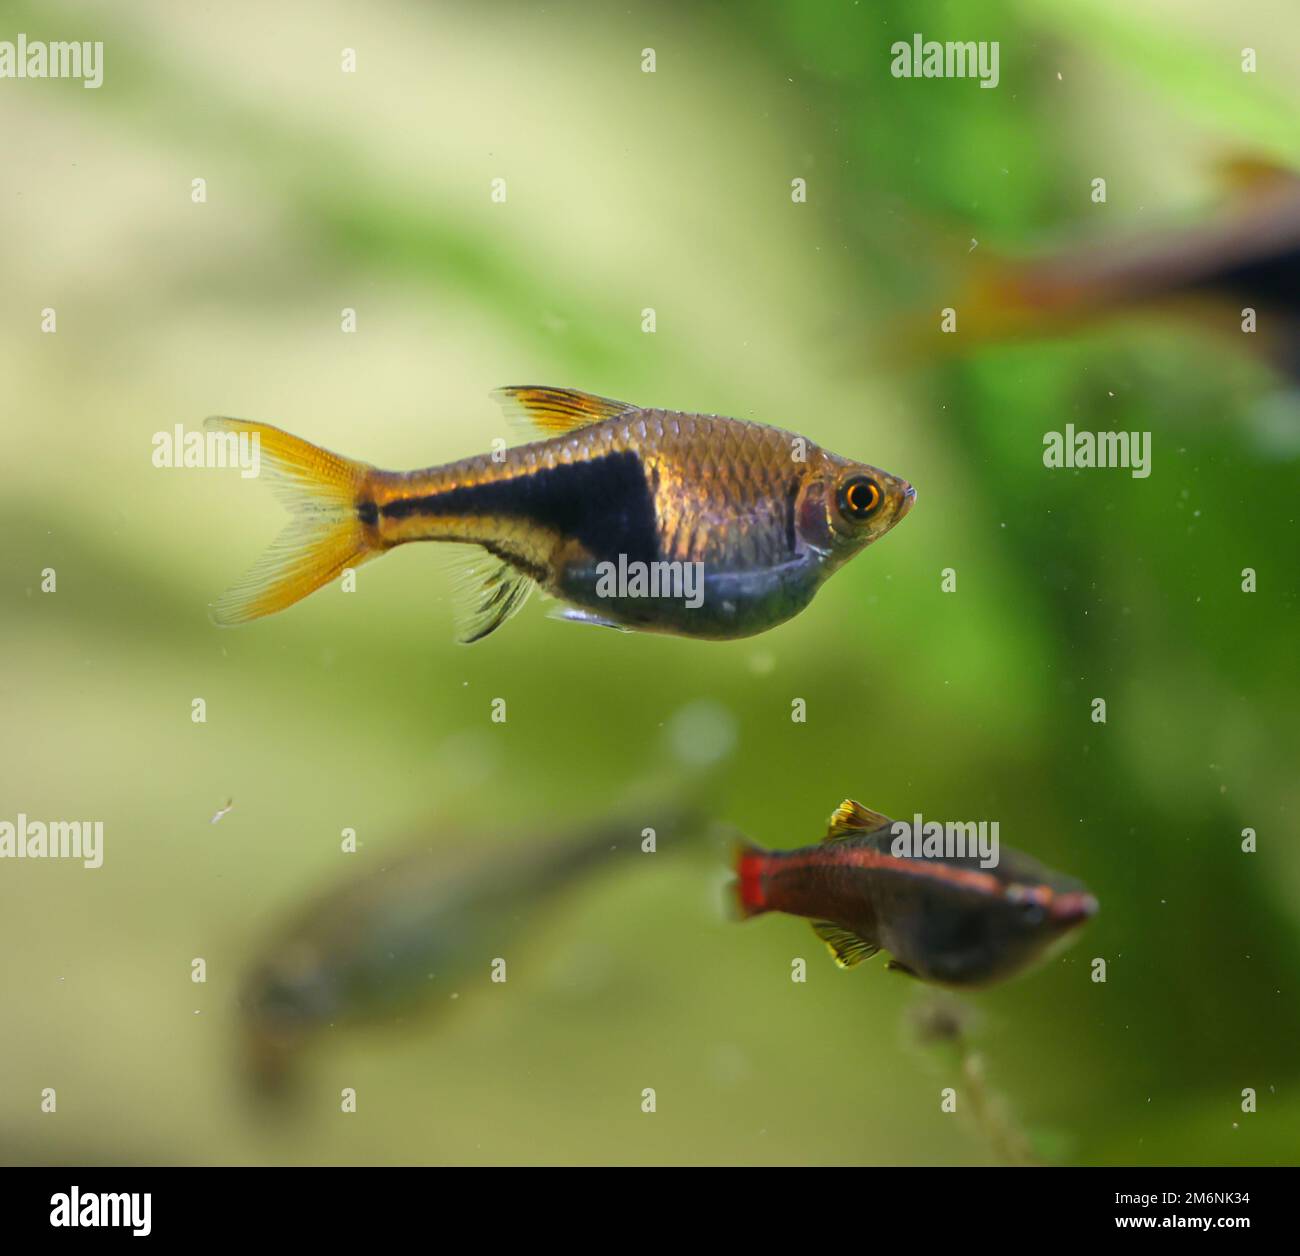 Close up of a fish, a wedge spotted danio in an aquarium. Stock Photo